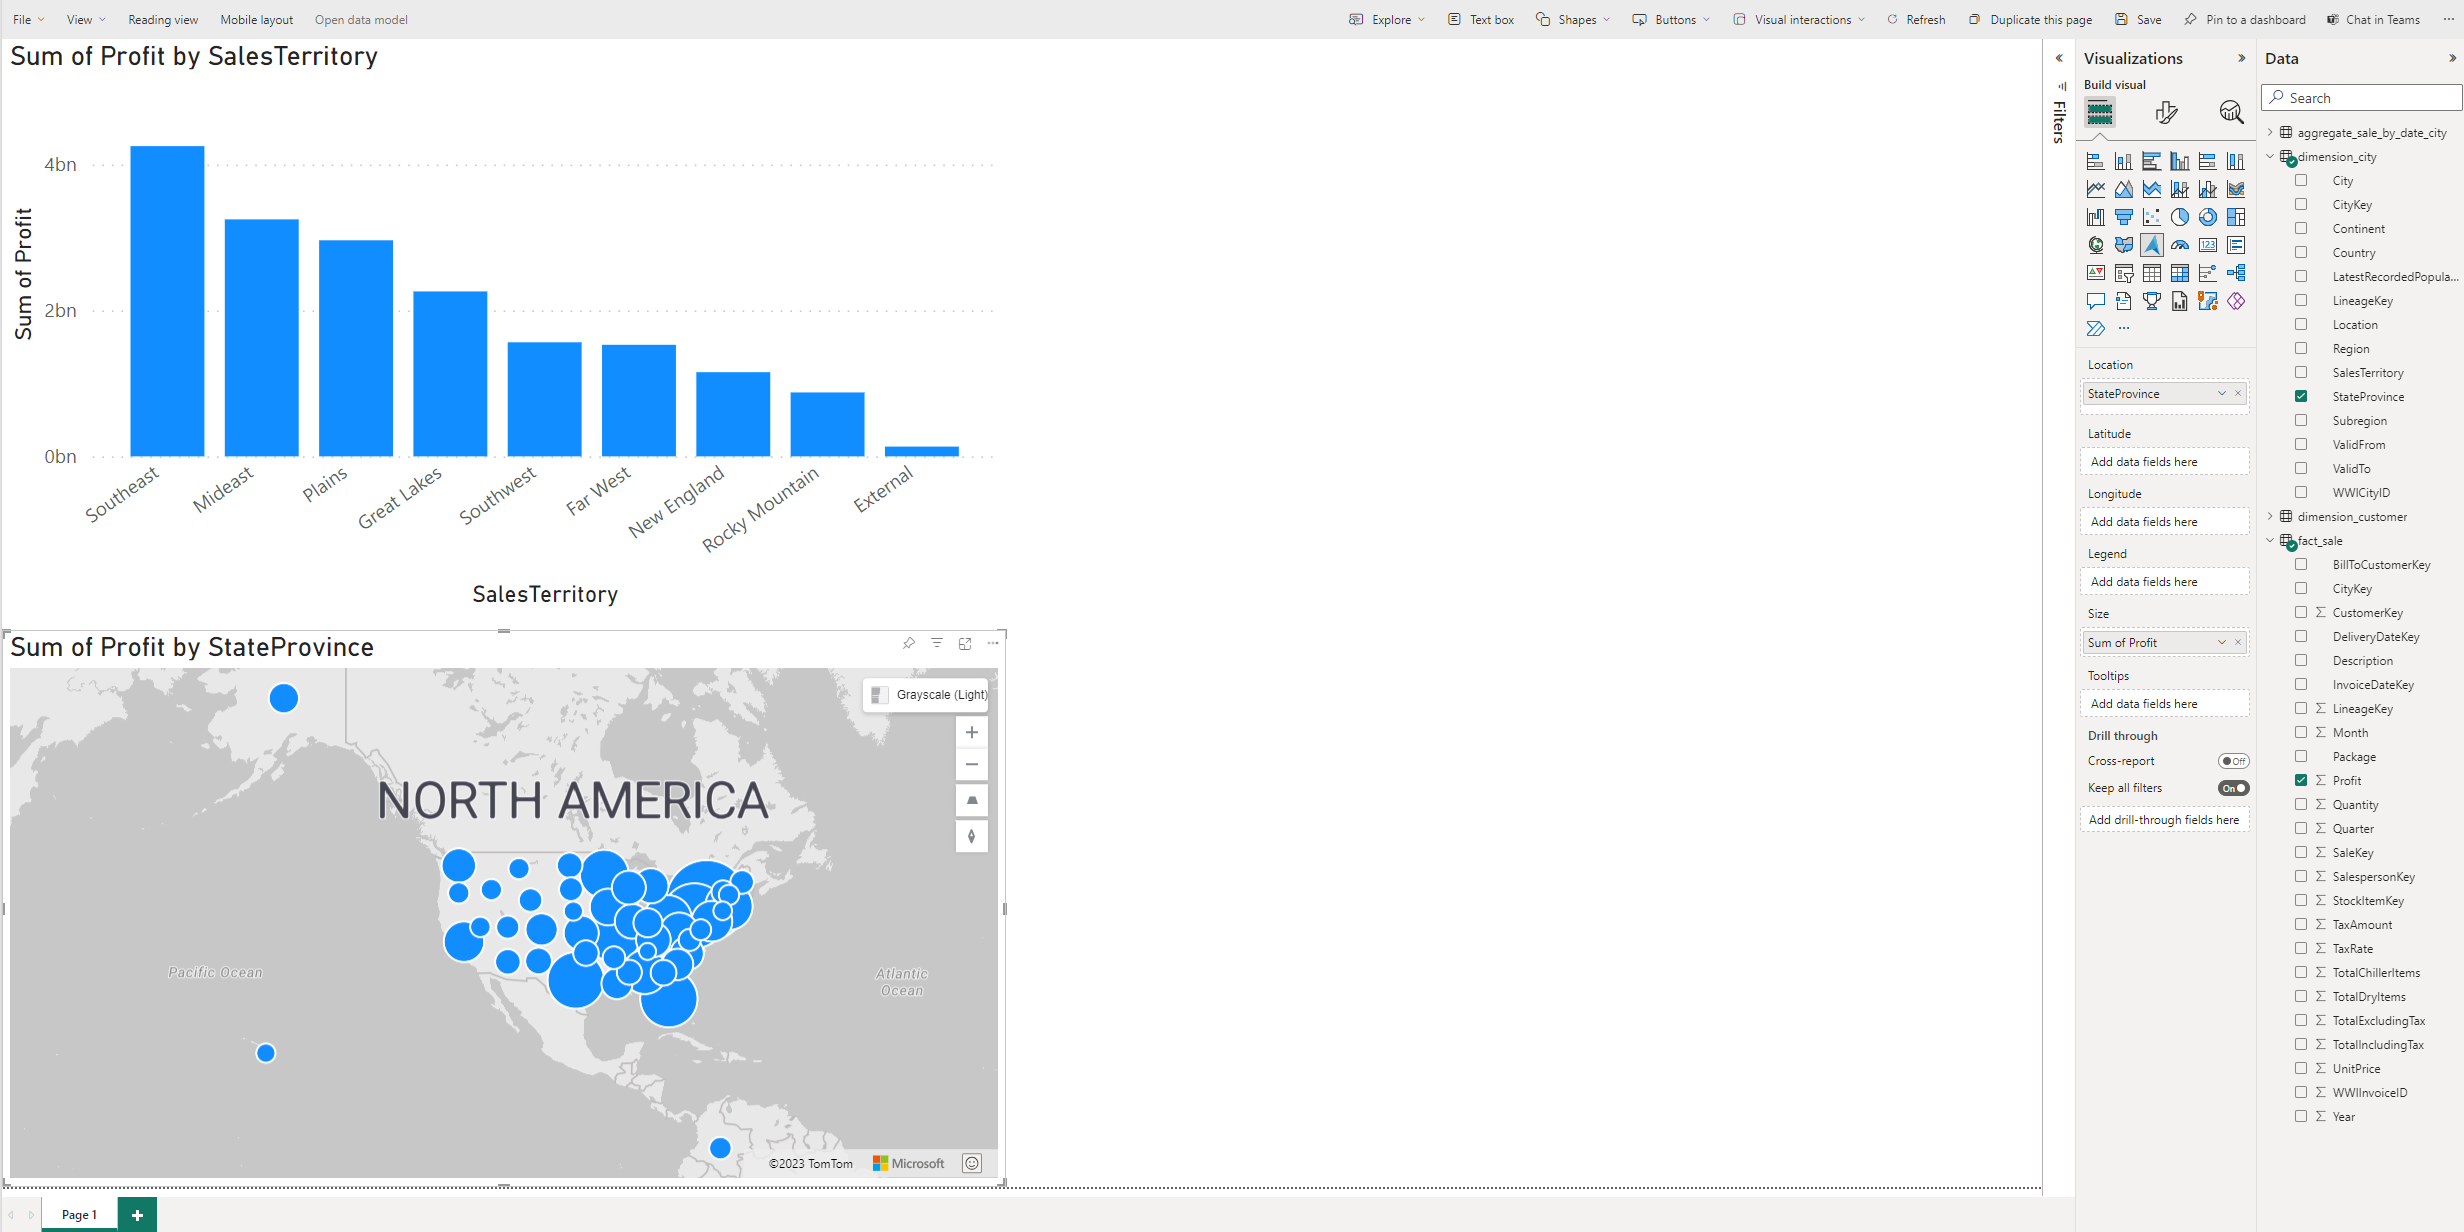 Screenshot of the canvas next to the Visualization and Data panes, showing a bar chart and a map plot on the canvas.